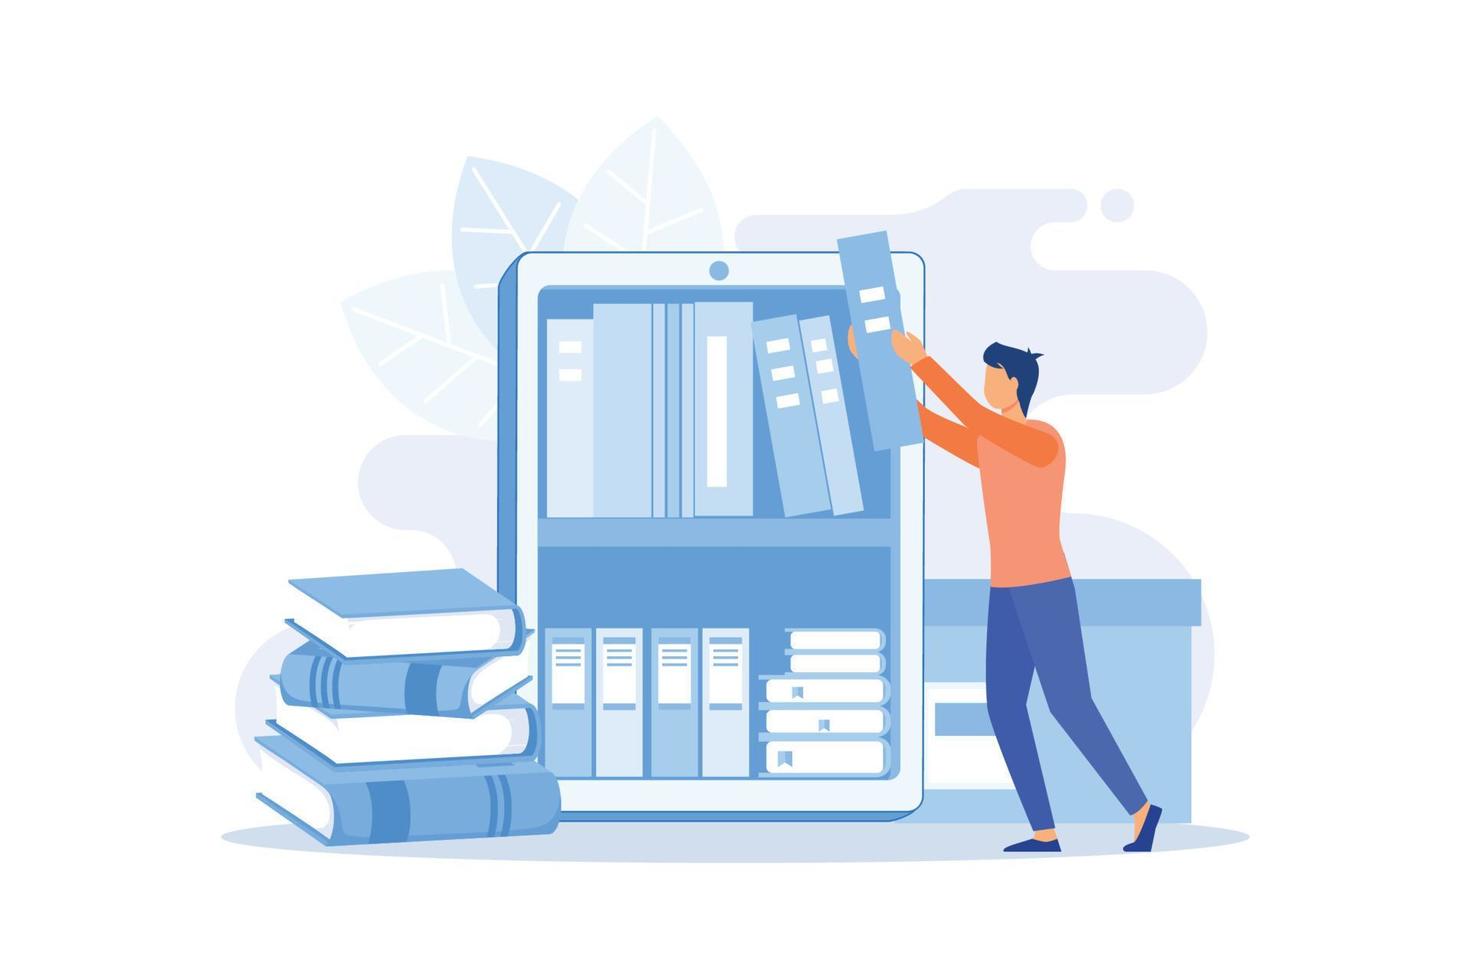 Ebooks collection. Library archive, e reading, literature. Male cartoon character loading books in ereader. Man putting novels in covers on bookshelf. Vector illustration